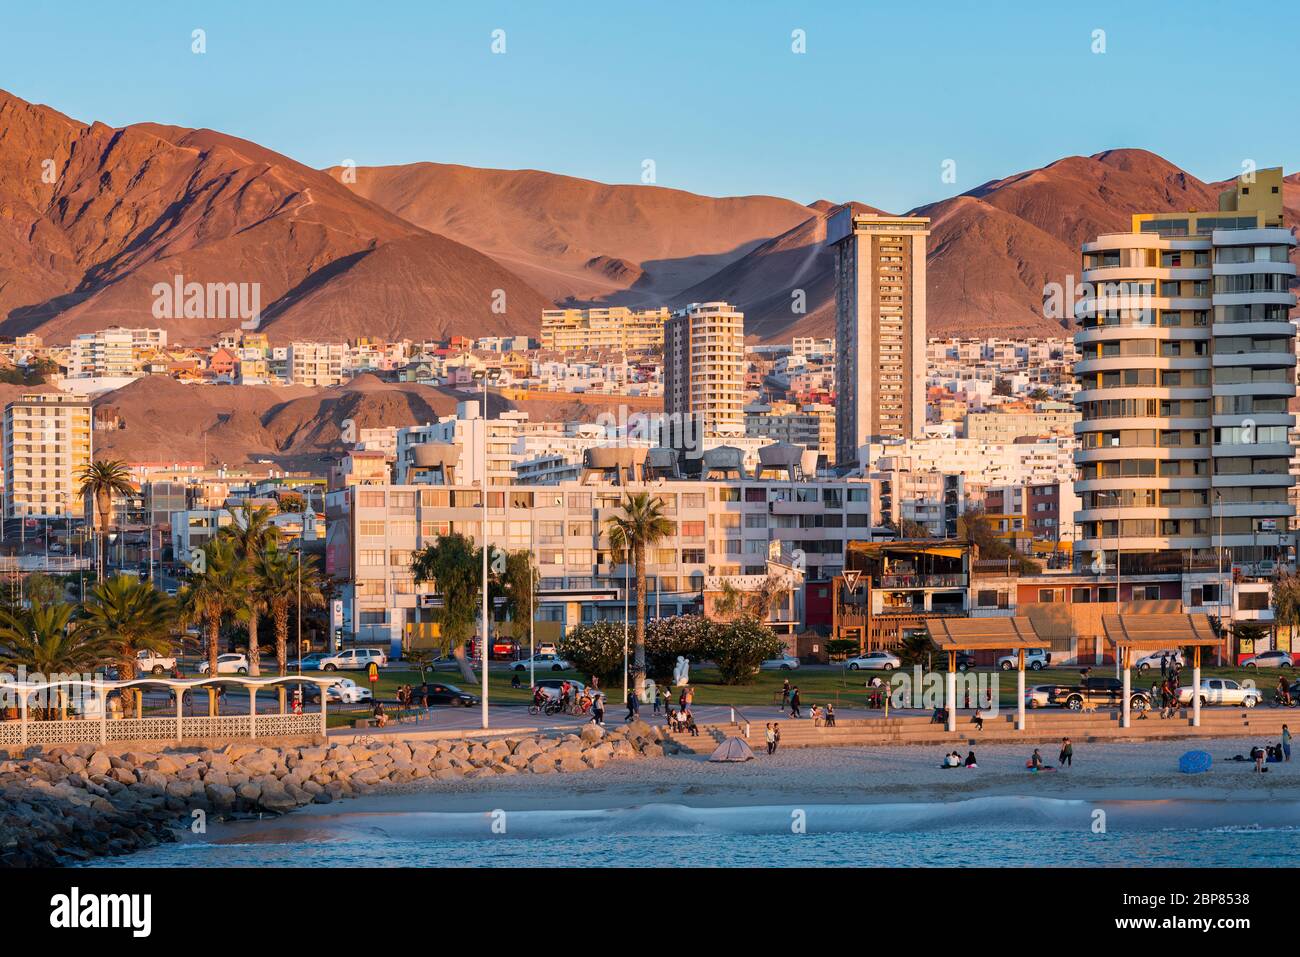 Antofagasta, Region de Antofagasta, Chile - Skyline of buildings and people at the boulevard at the side of the beach. Stock Photo